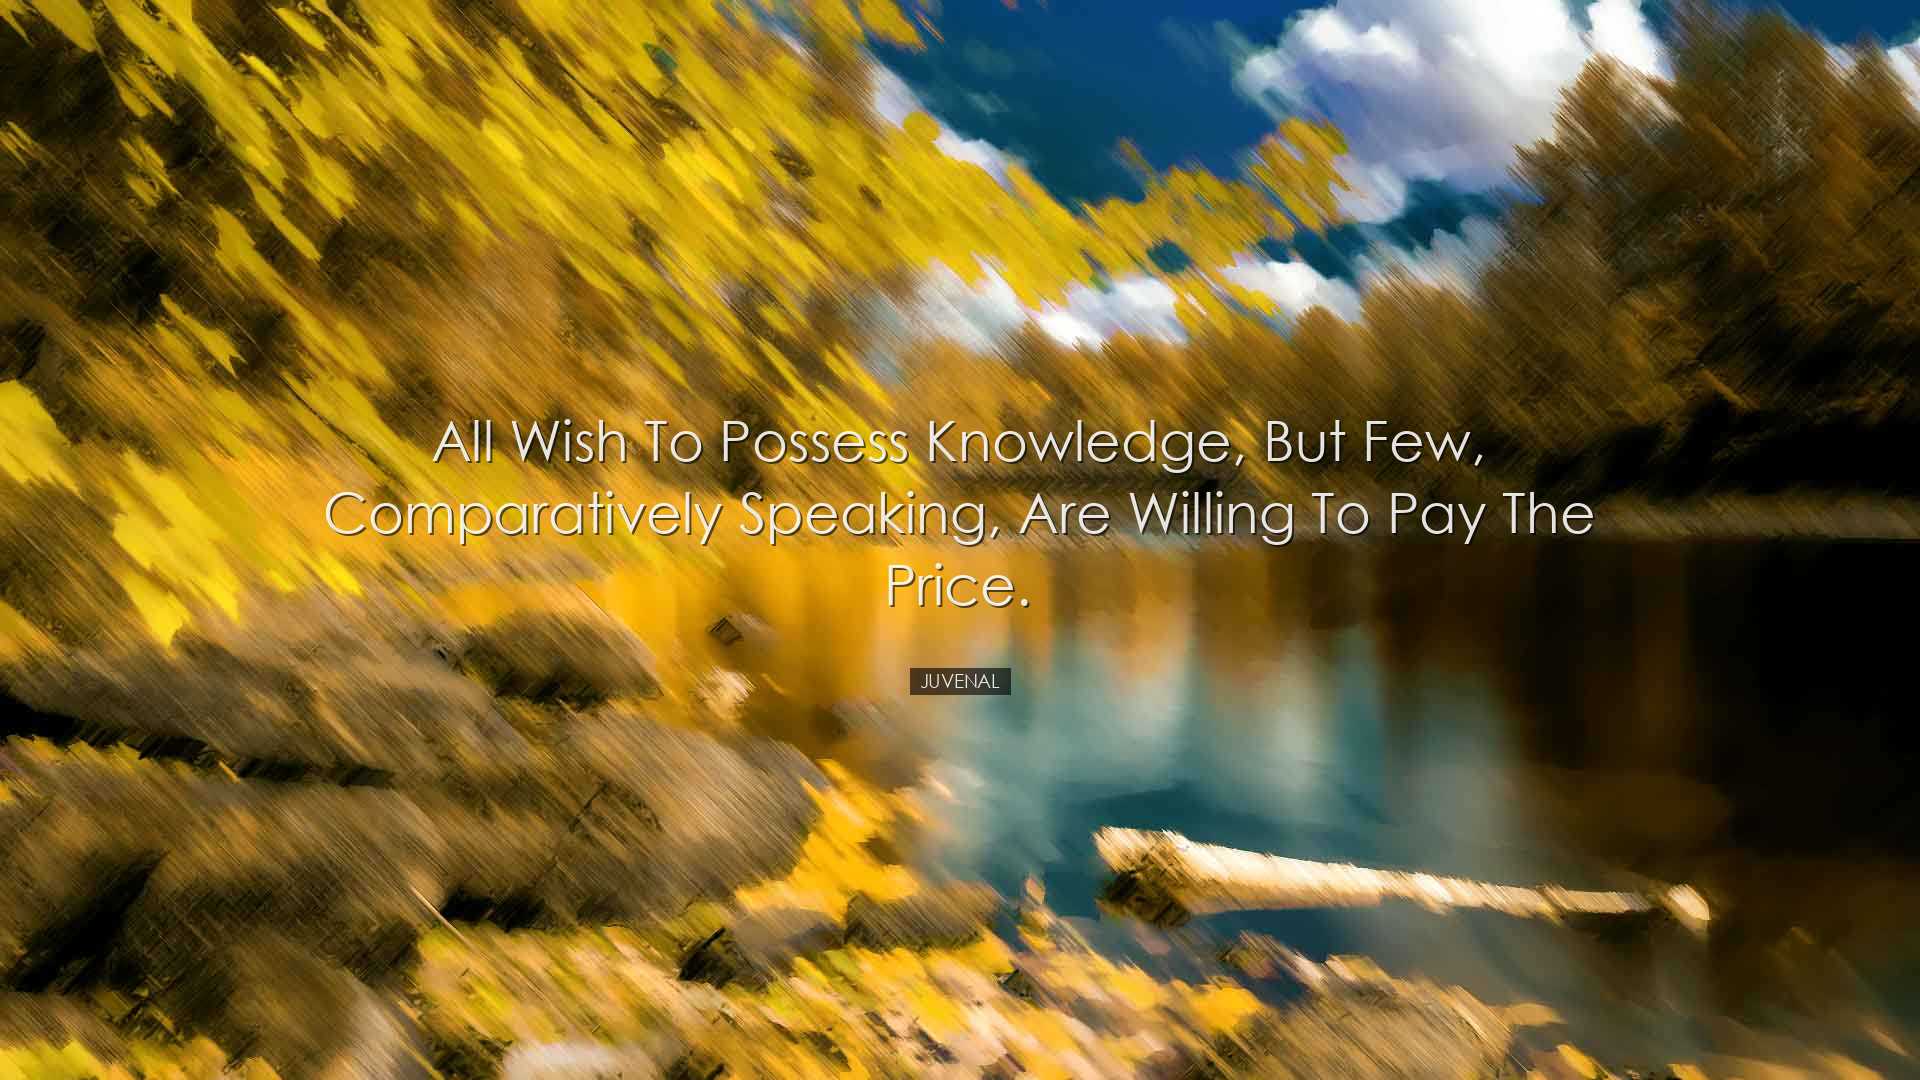 All wish to possess knowledge, but few, comparatively speaking, ar